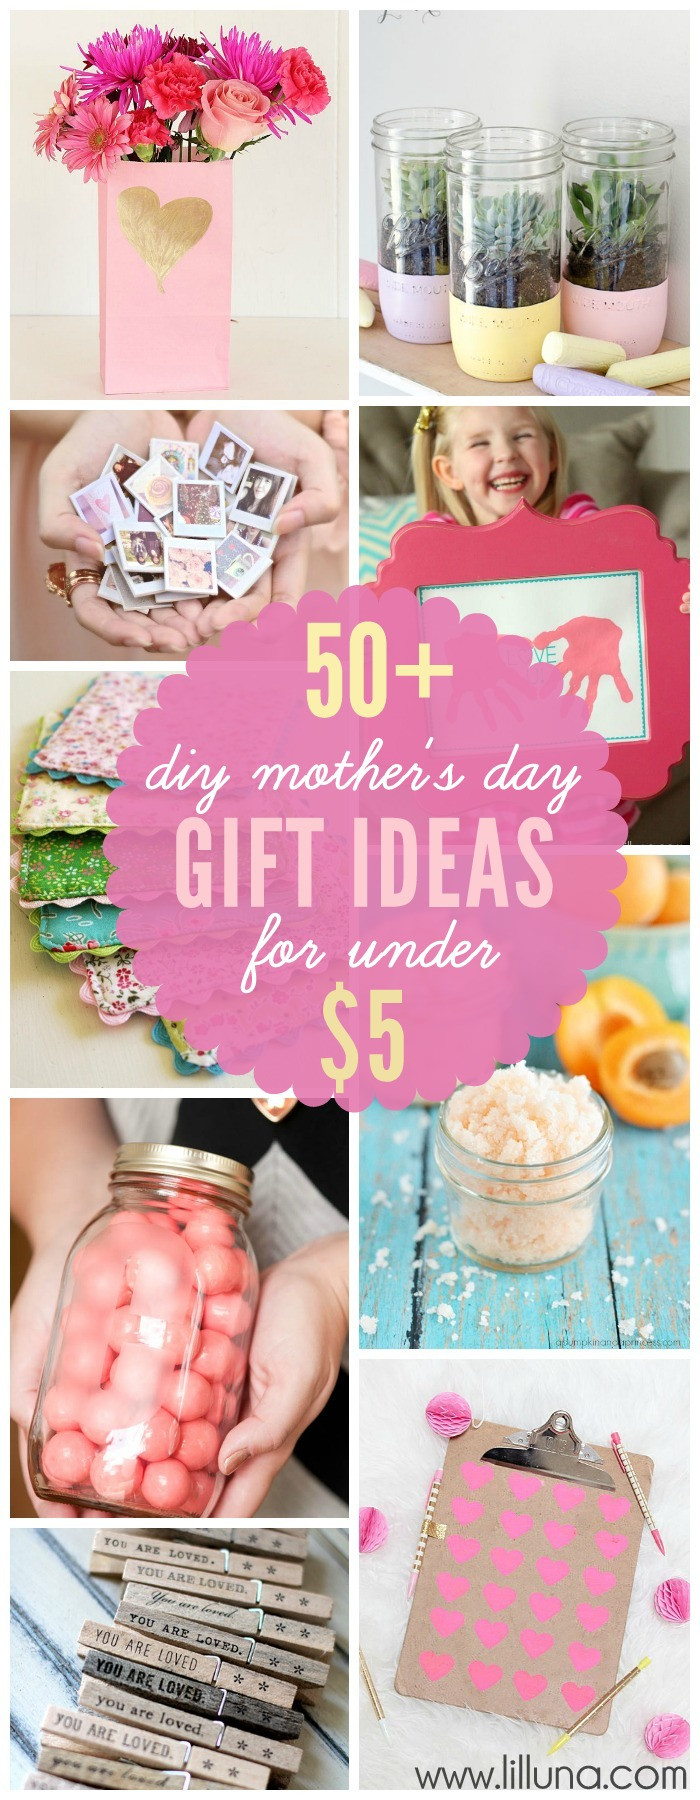 What To Make For Mother'S Day Gift Ideas
 DIY Mother s Day Gifts for under 5